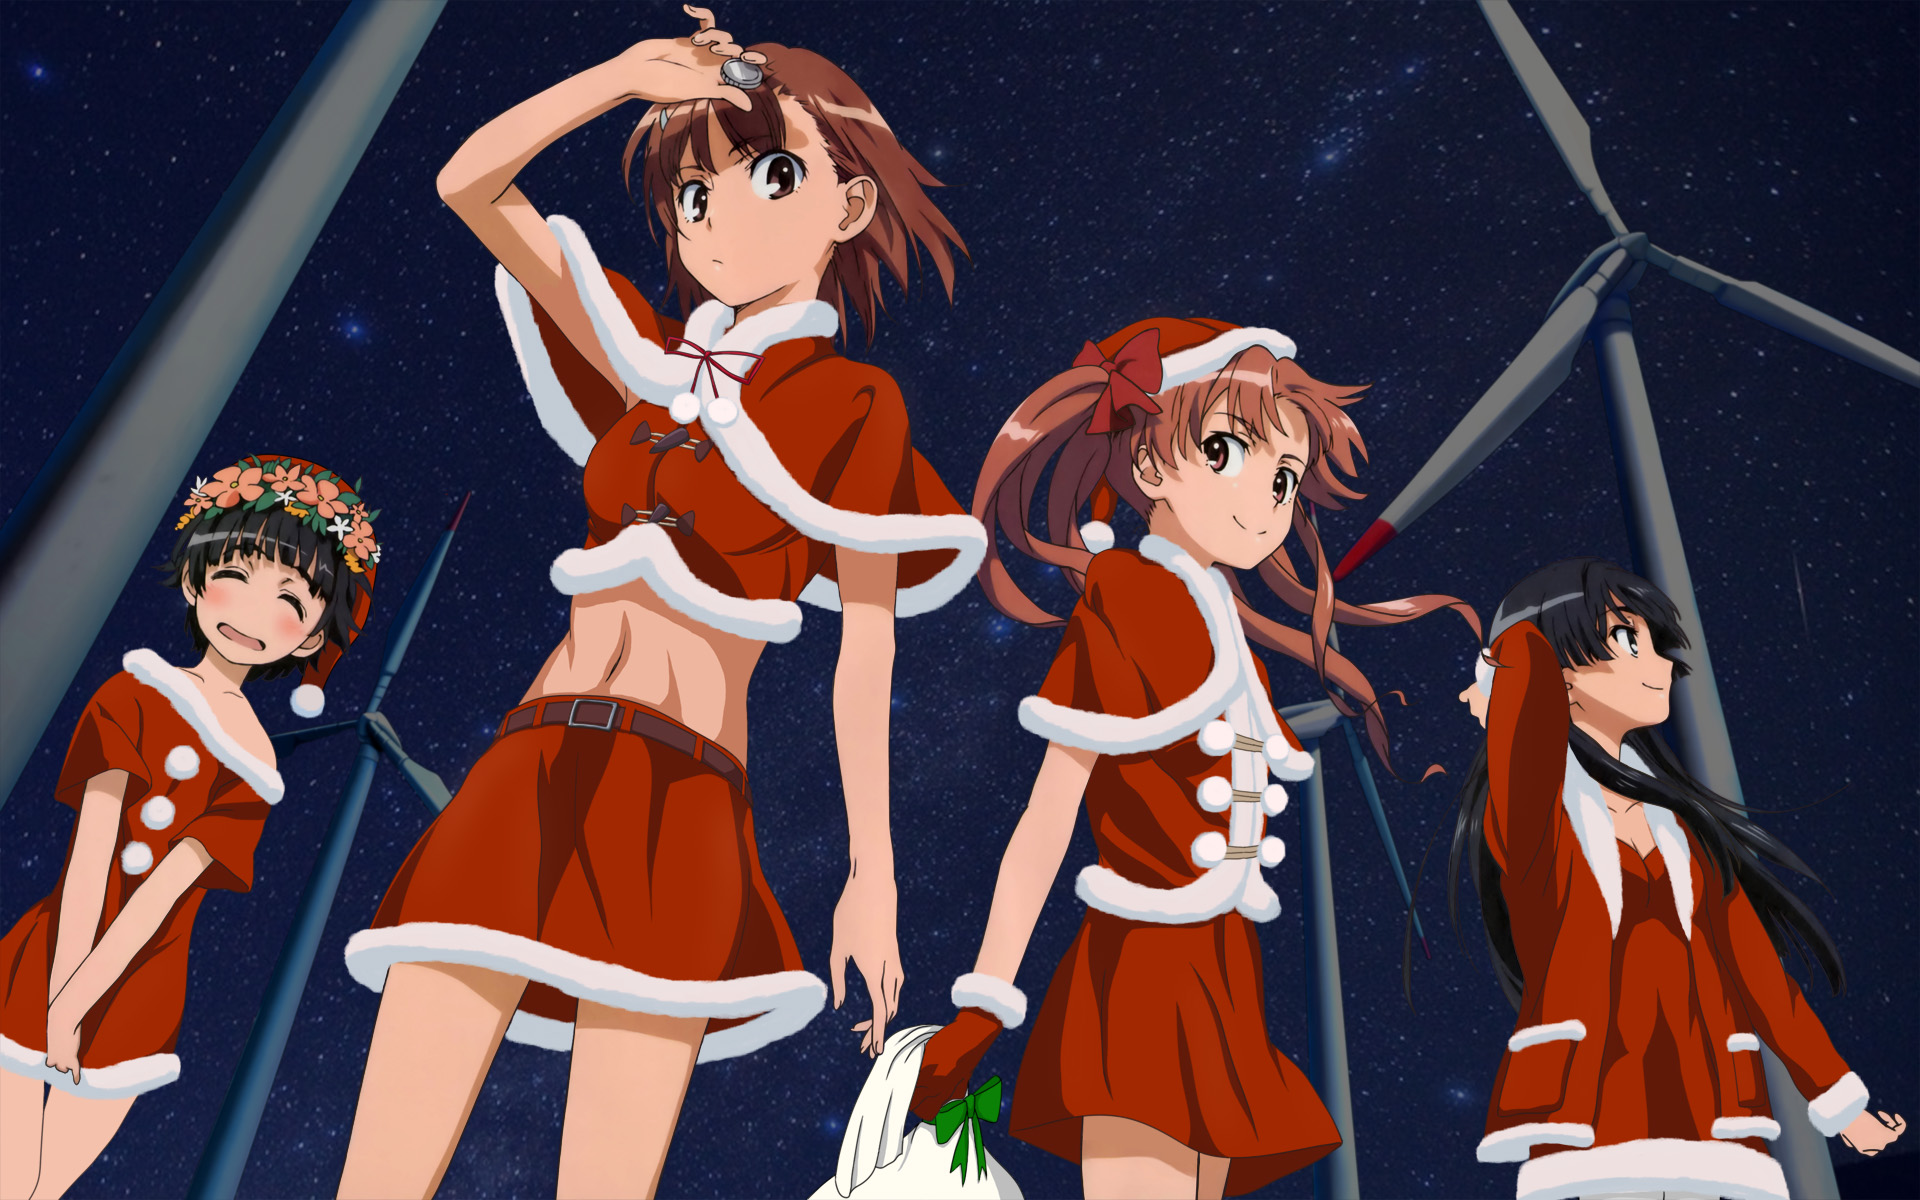 Anime character from A Certain Scientific Railgun, appearing poised and ready.